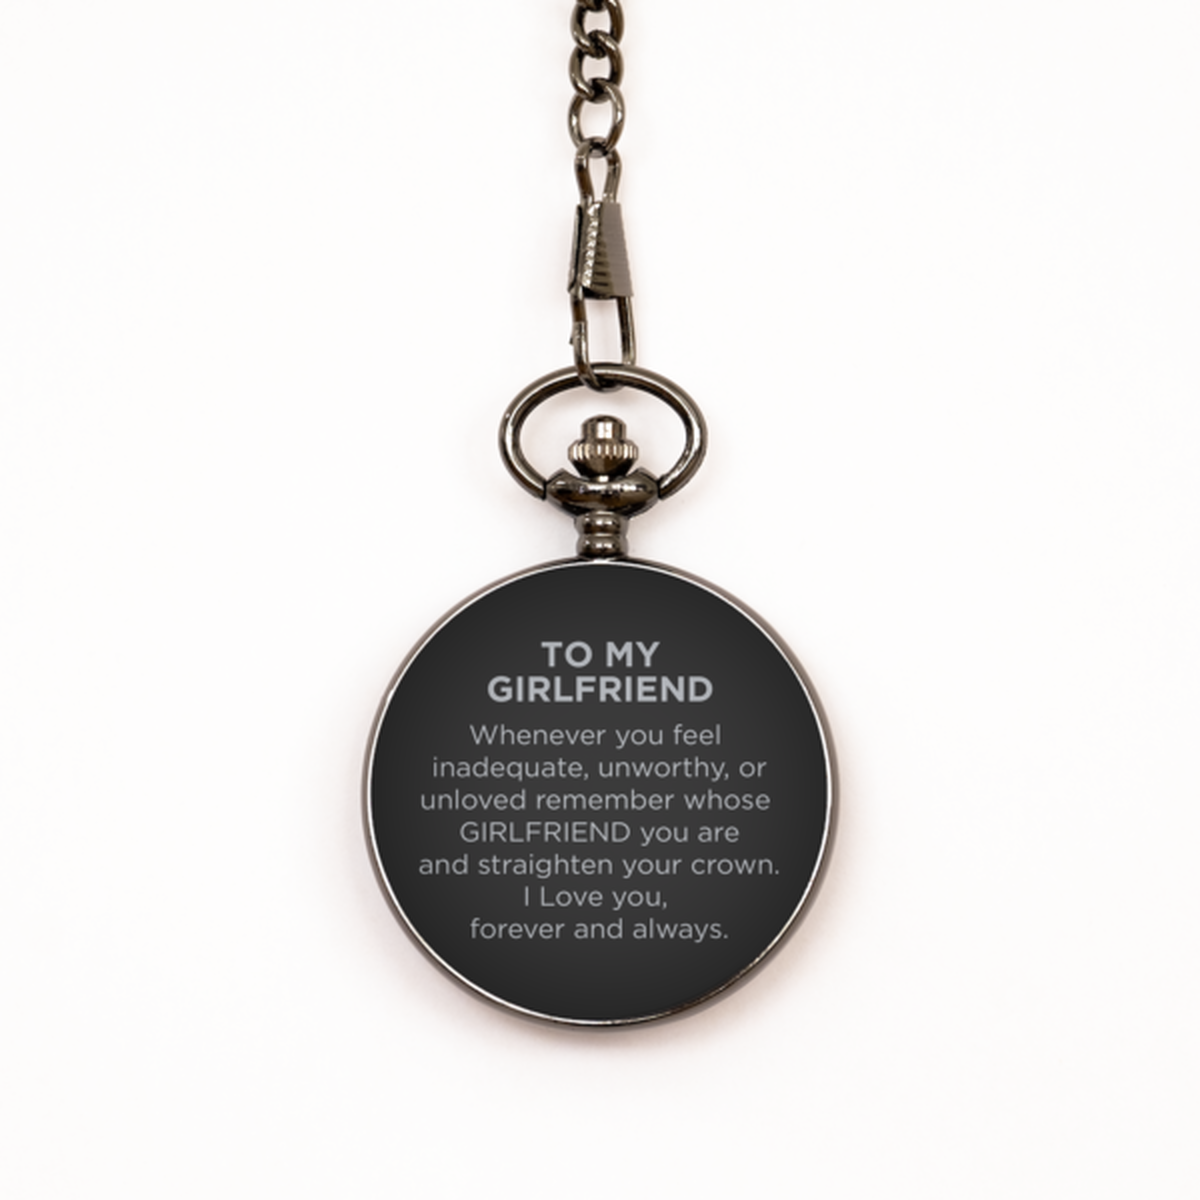 To My Girlfriend Black Pocket Watch, Forever And Always, Birthday Gifts For Girlfriend From Boyfriend, Valentines Gifts For Women